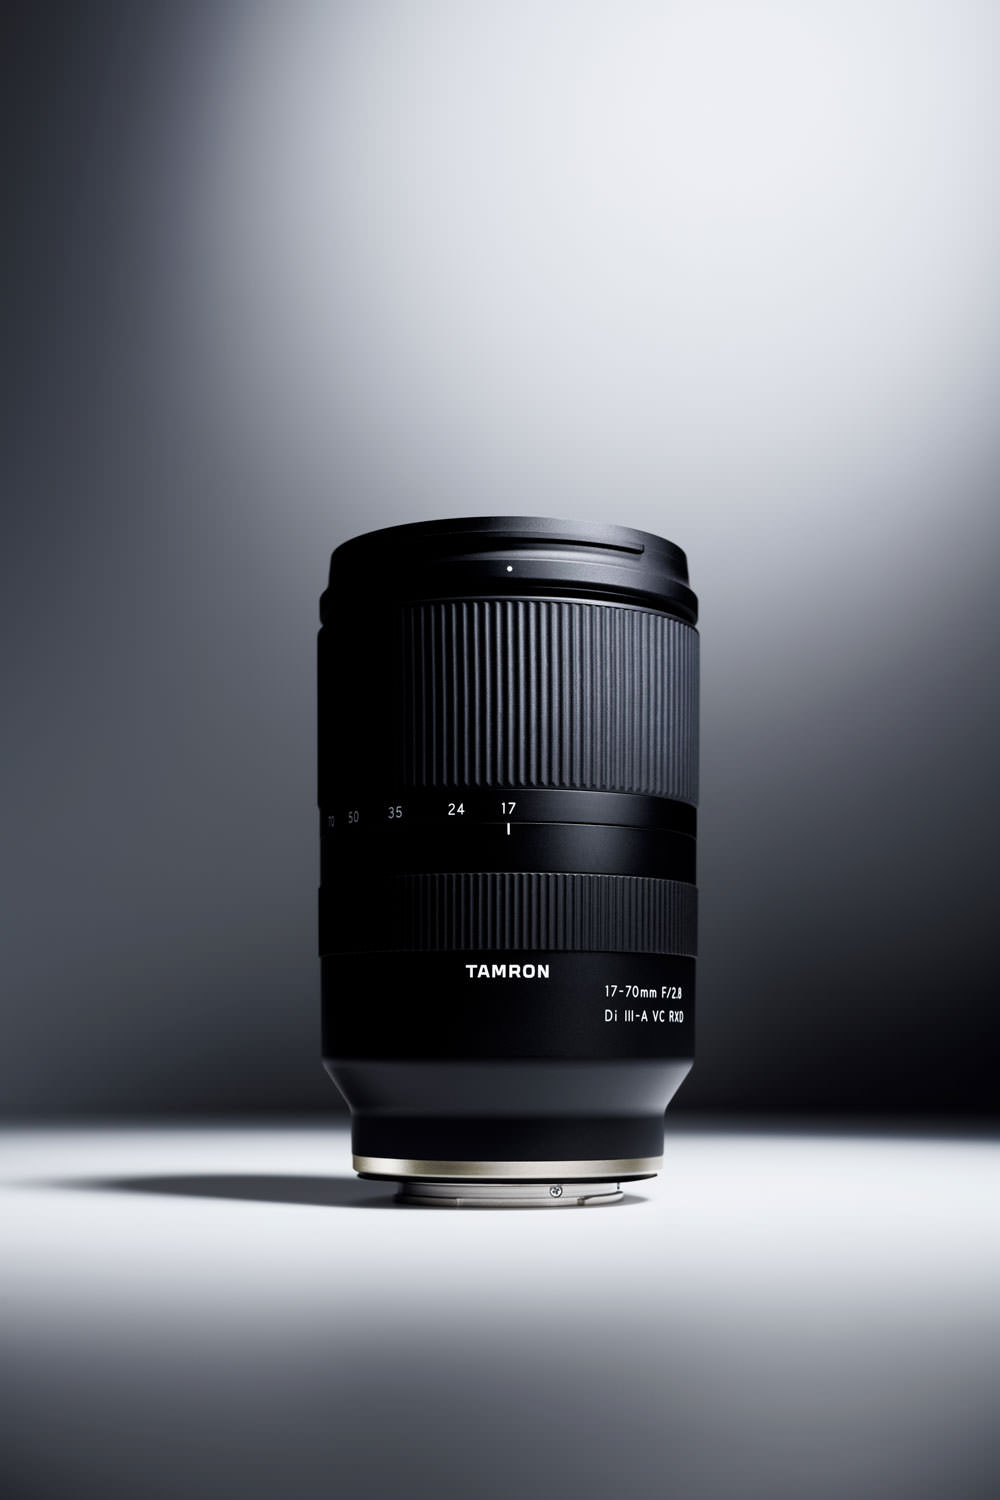 Tamron announces 17-70mm F2.8 Di III-A VC RXD for Sony E Mount